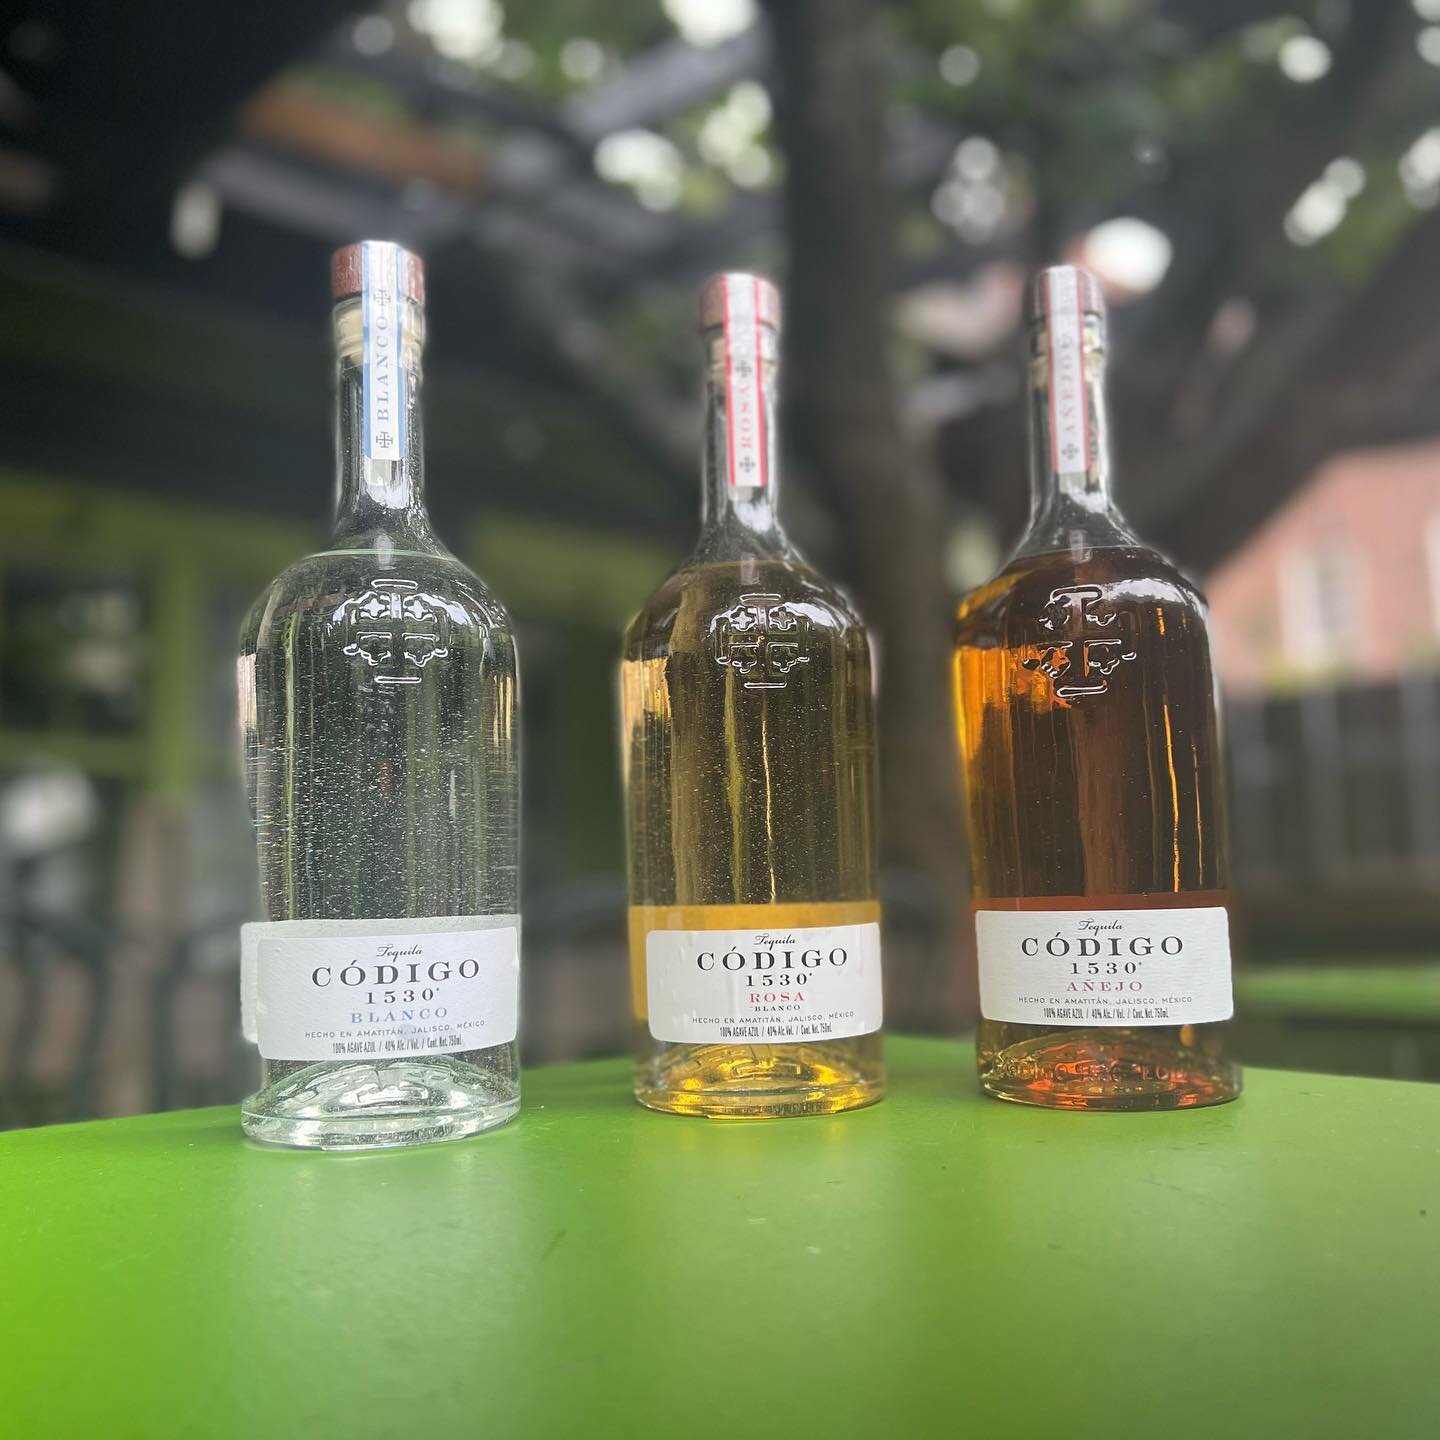 ✨Tequila Spotlight of the Month: Codigo ✨ Throughout the month of July, expand your palette and experience Codigo blanco, rosa, a&ntilde;ejo, or mezcal!